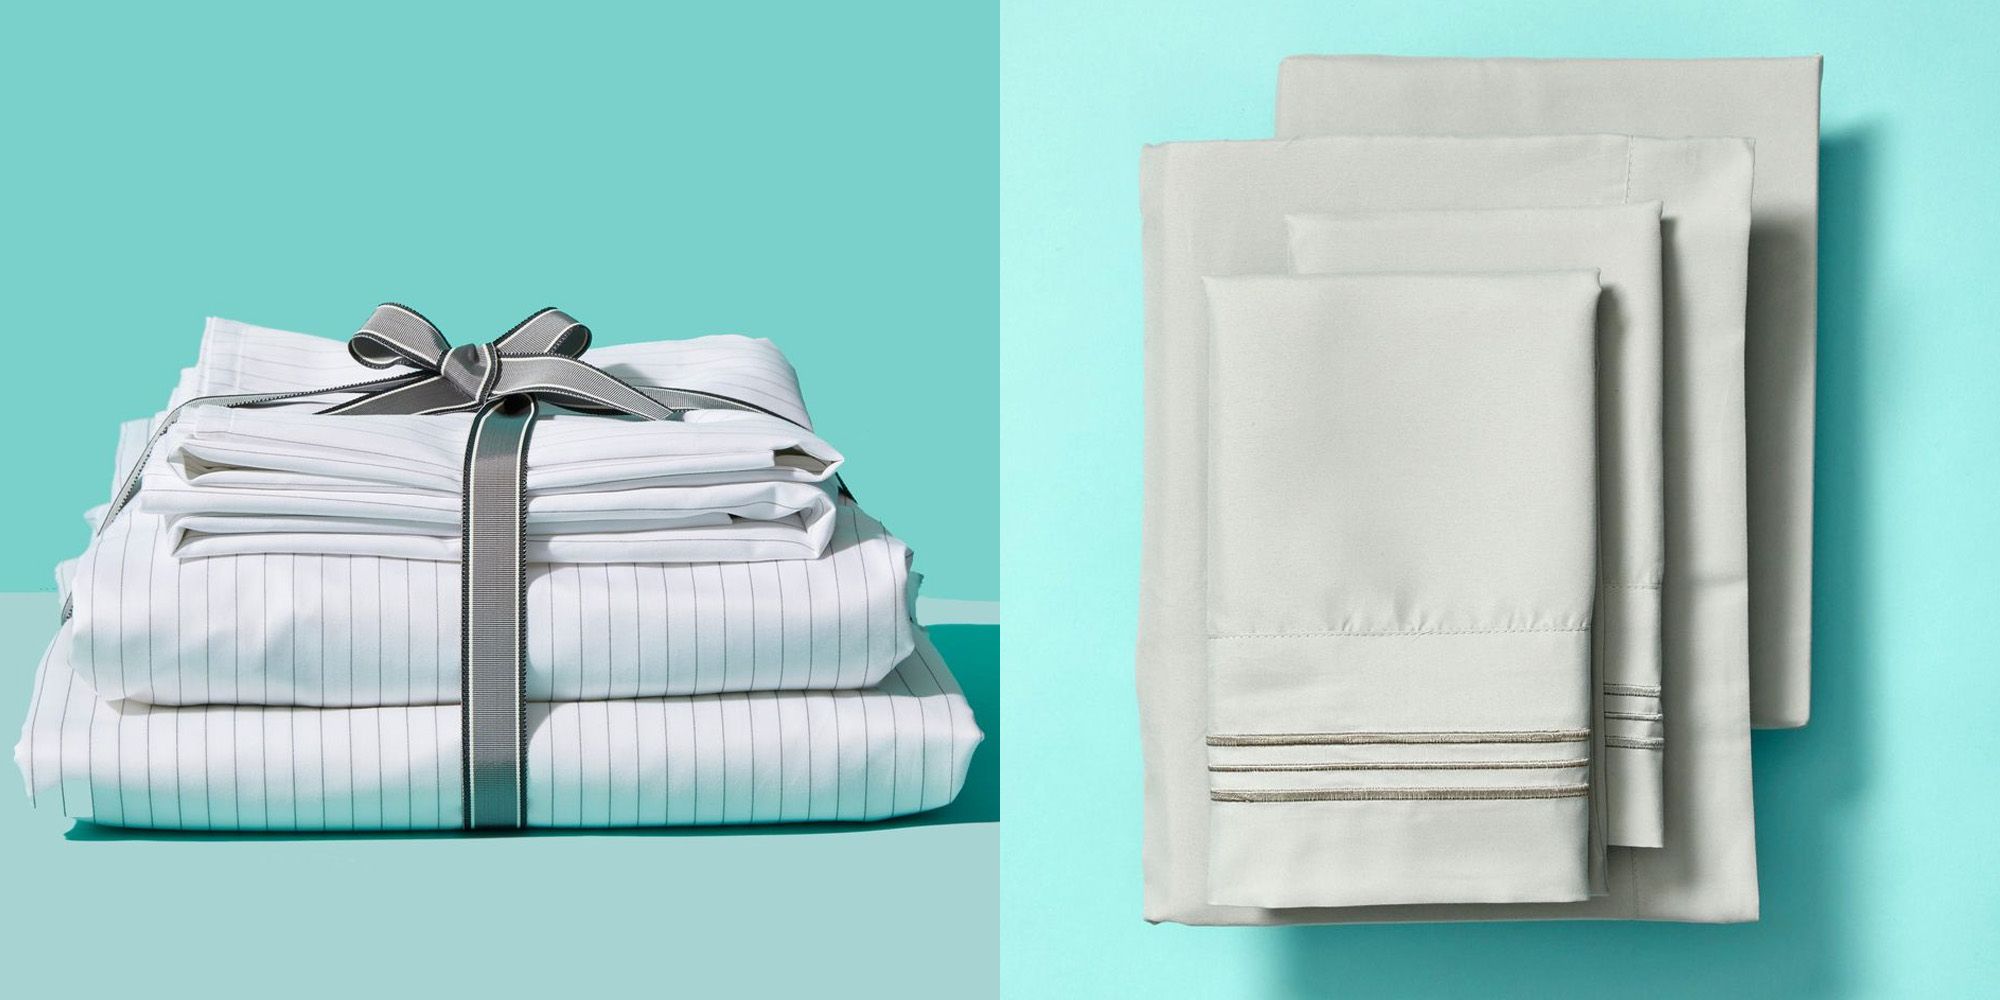 The 2 Best Sheets for Hot Sleepers